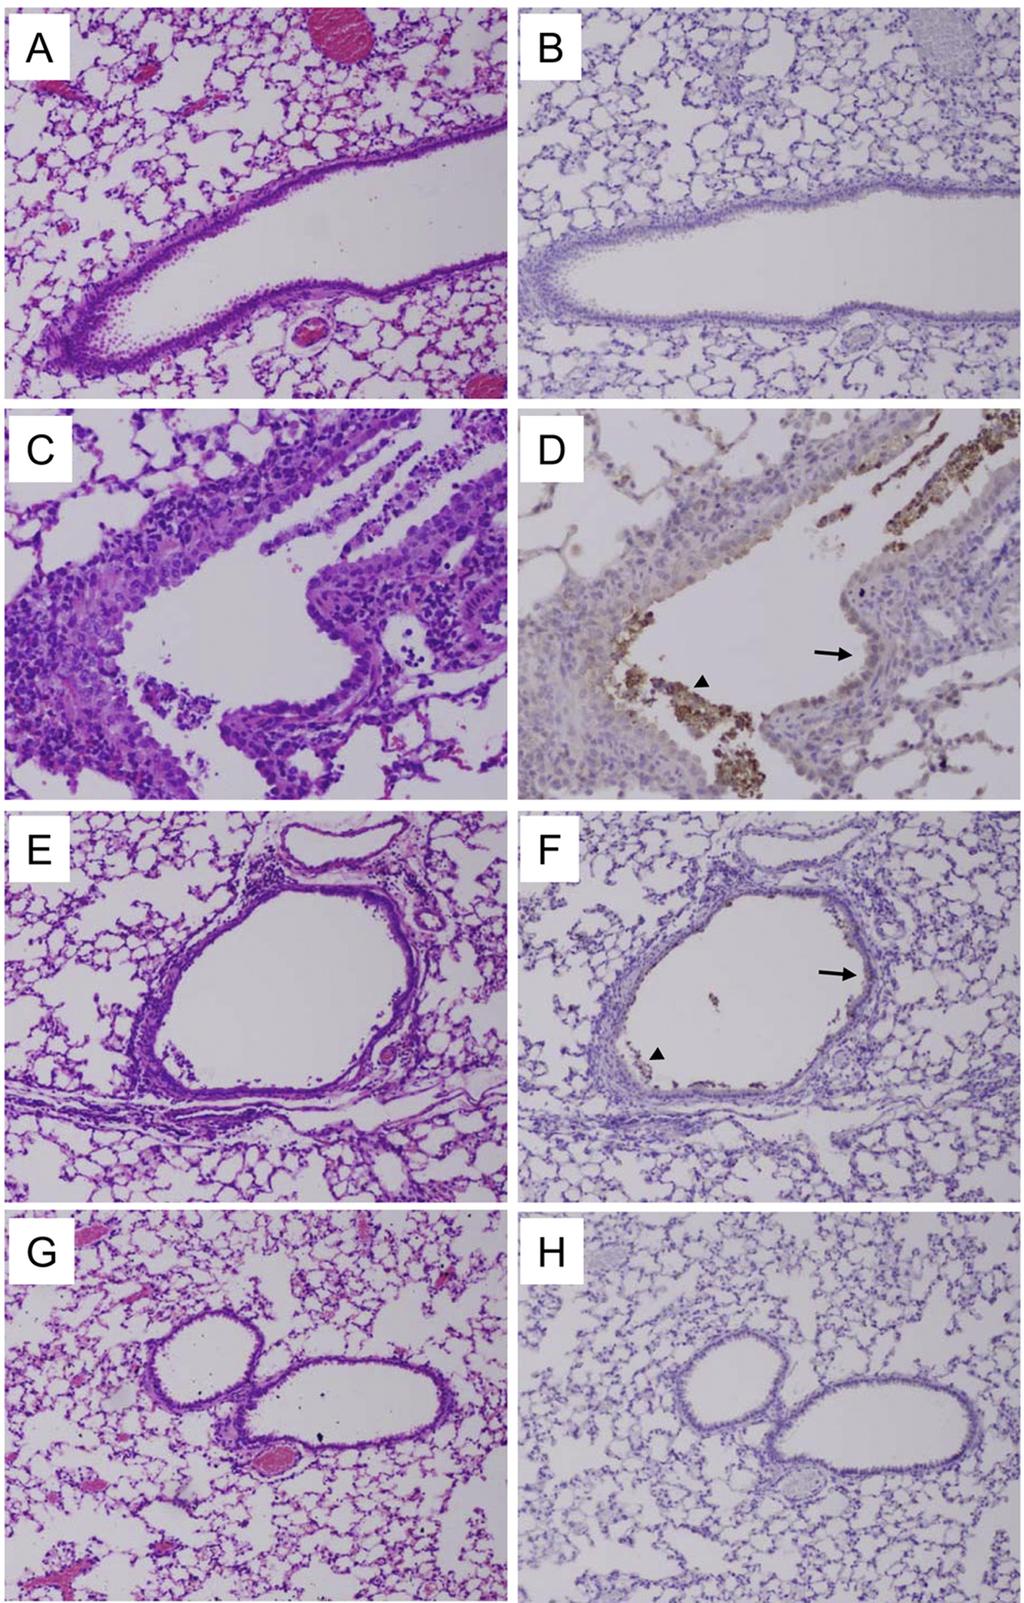 PB2-E627K and the 2009 H1N1 Pandemic Virus Polymerase FIG 4 Pathology and immunohistochemistry of influenza virus-infected mouse lung tissue.